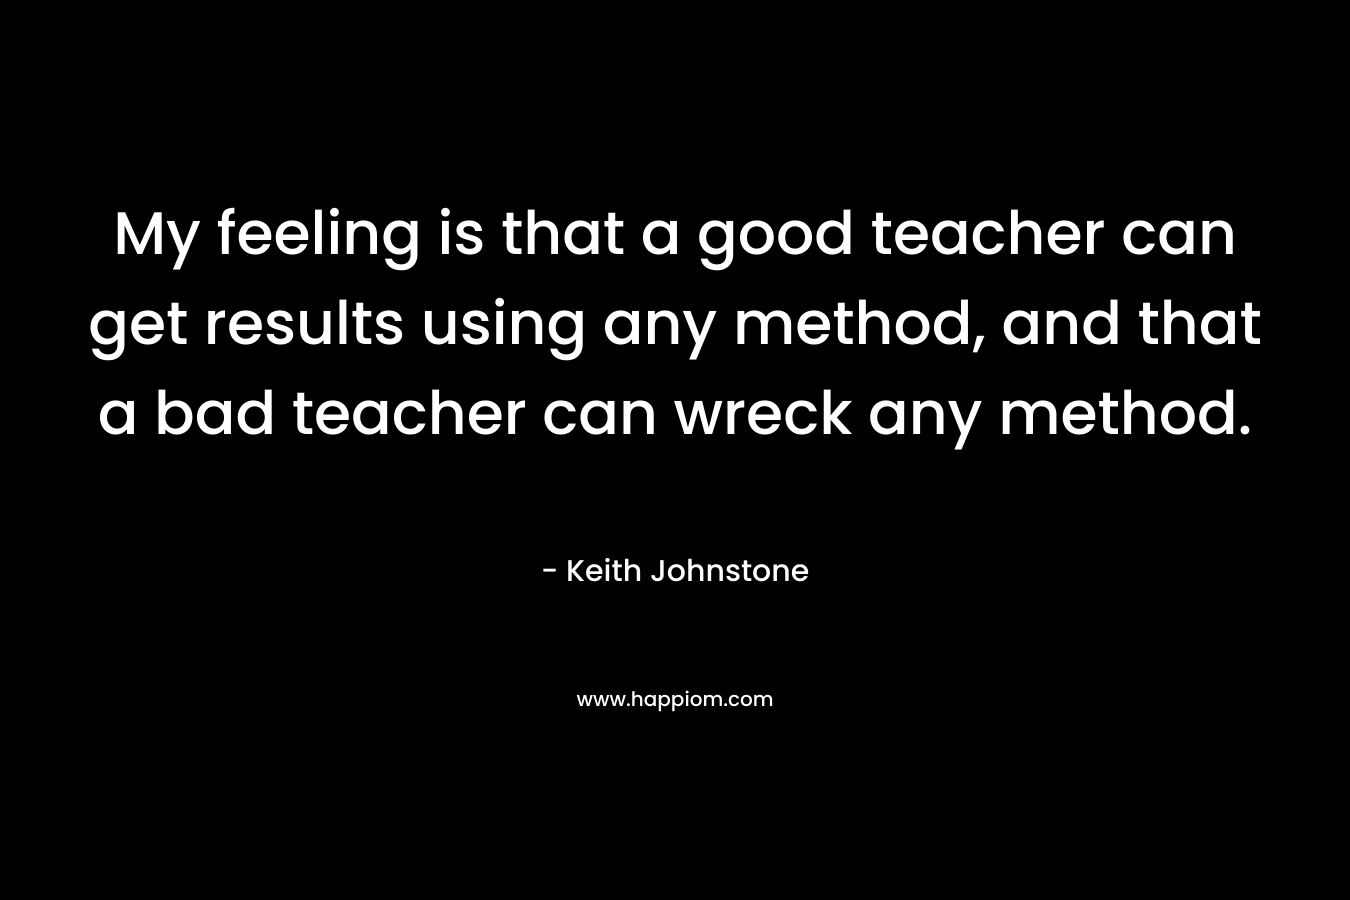 My feeling is that a good teacher can get results using any method, and that a bad teacher can wreck any method.